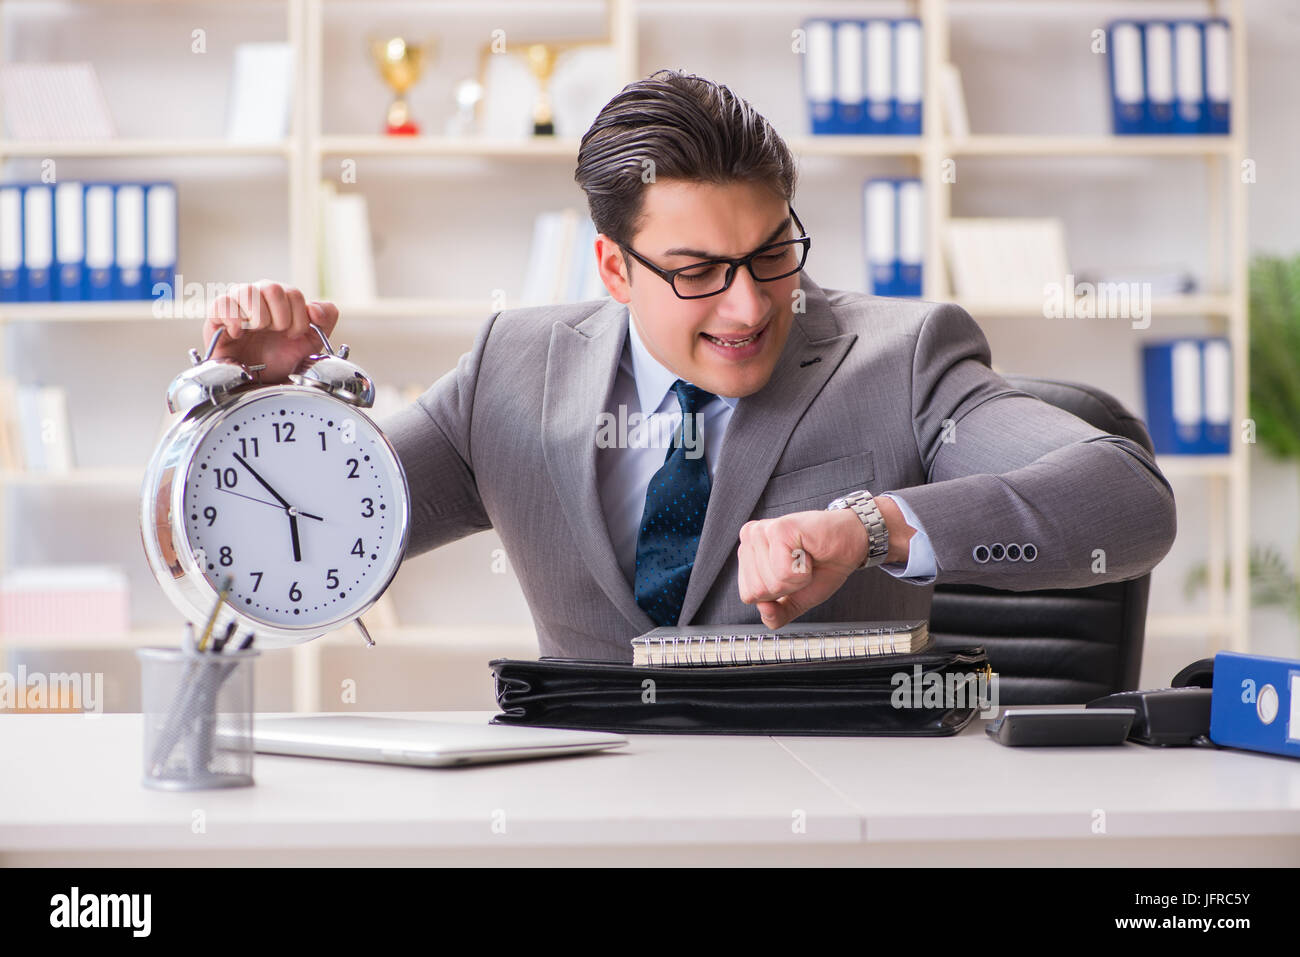 The businessman rushing in the office Stock Photo